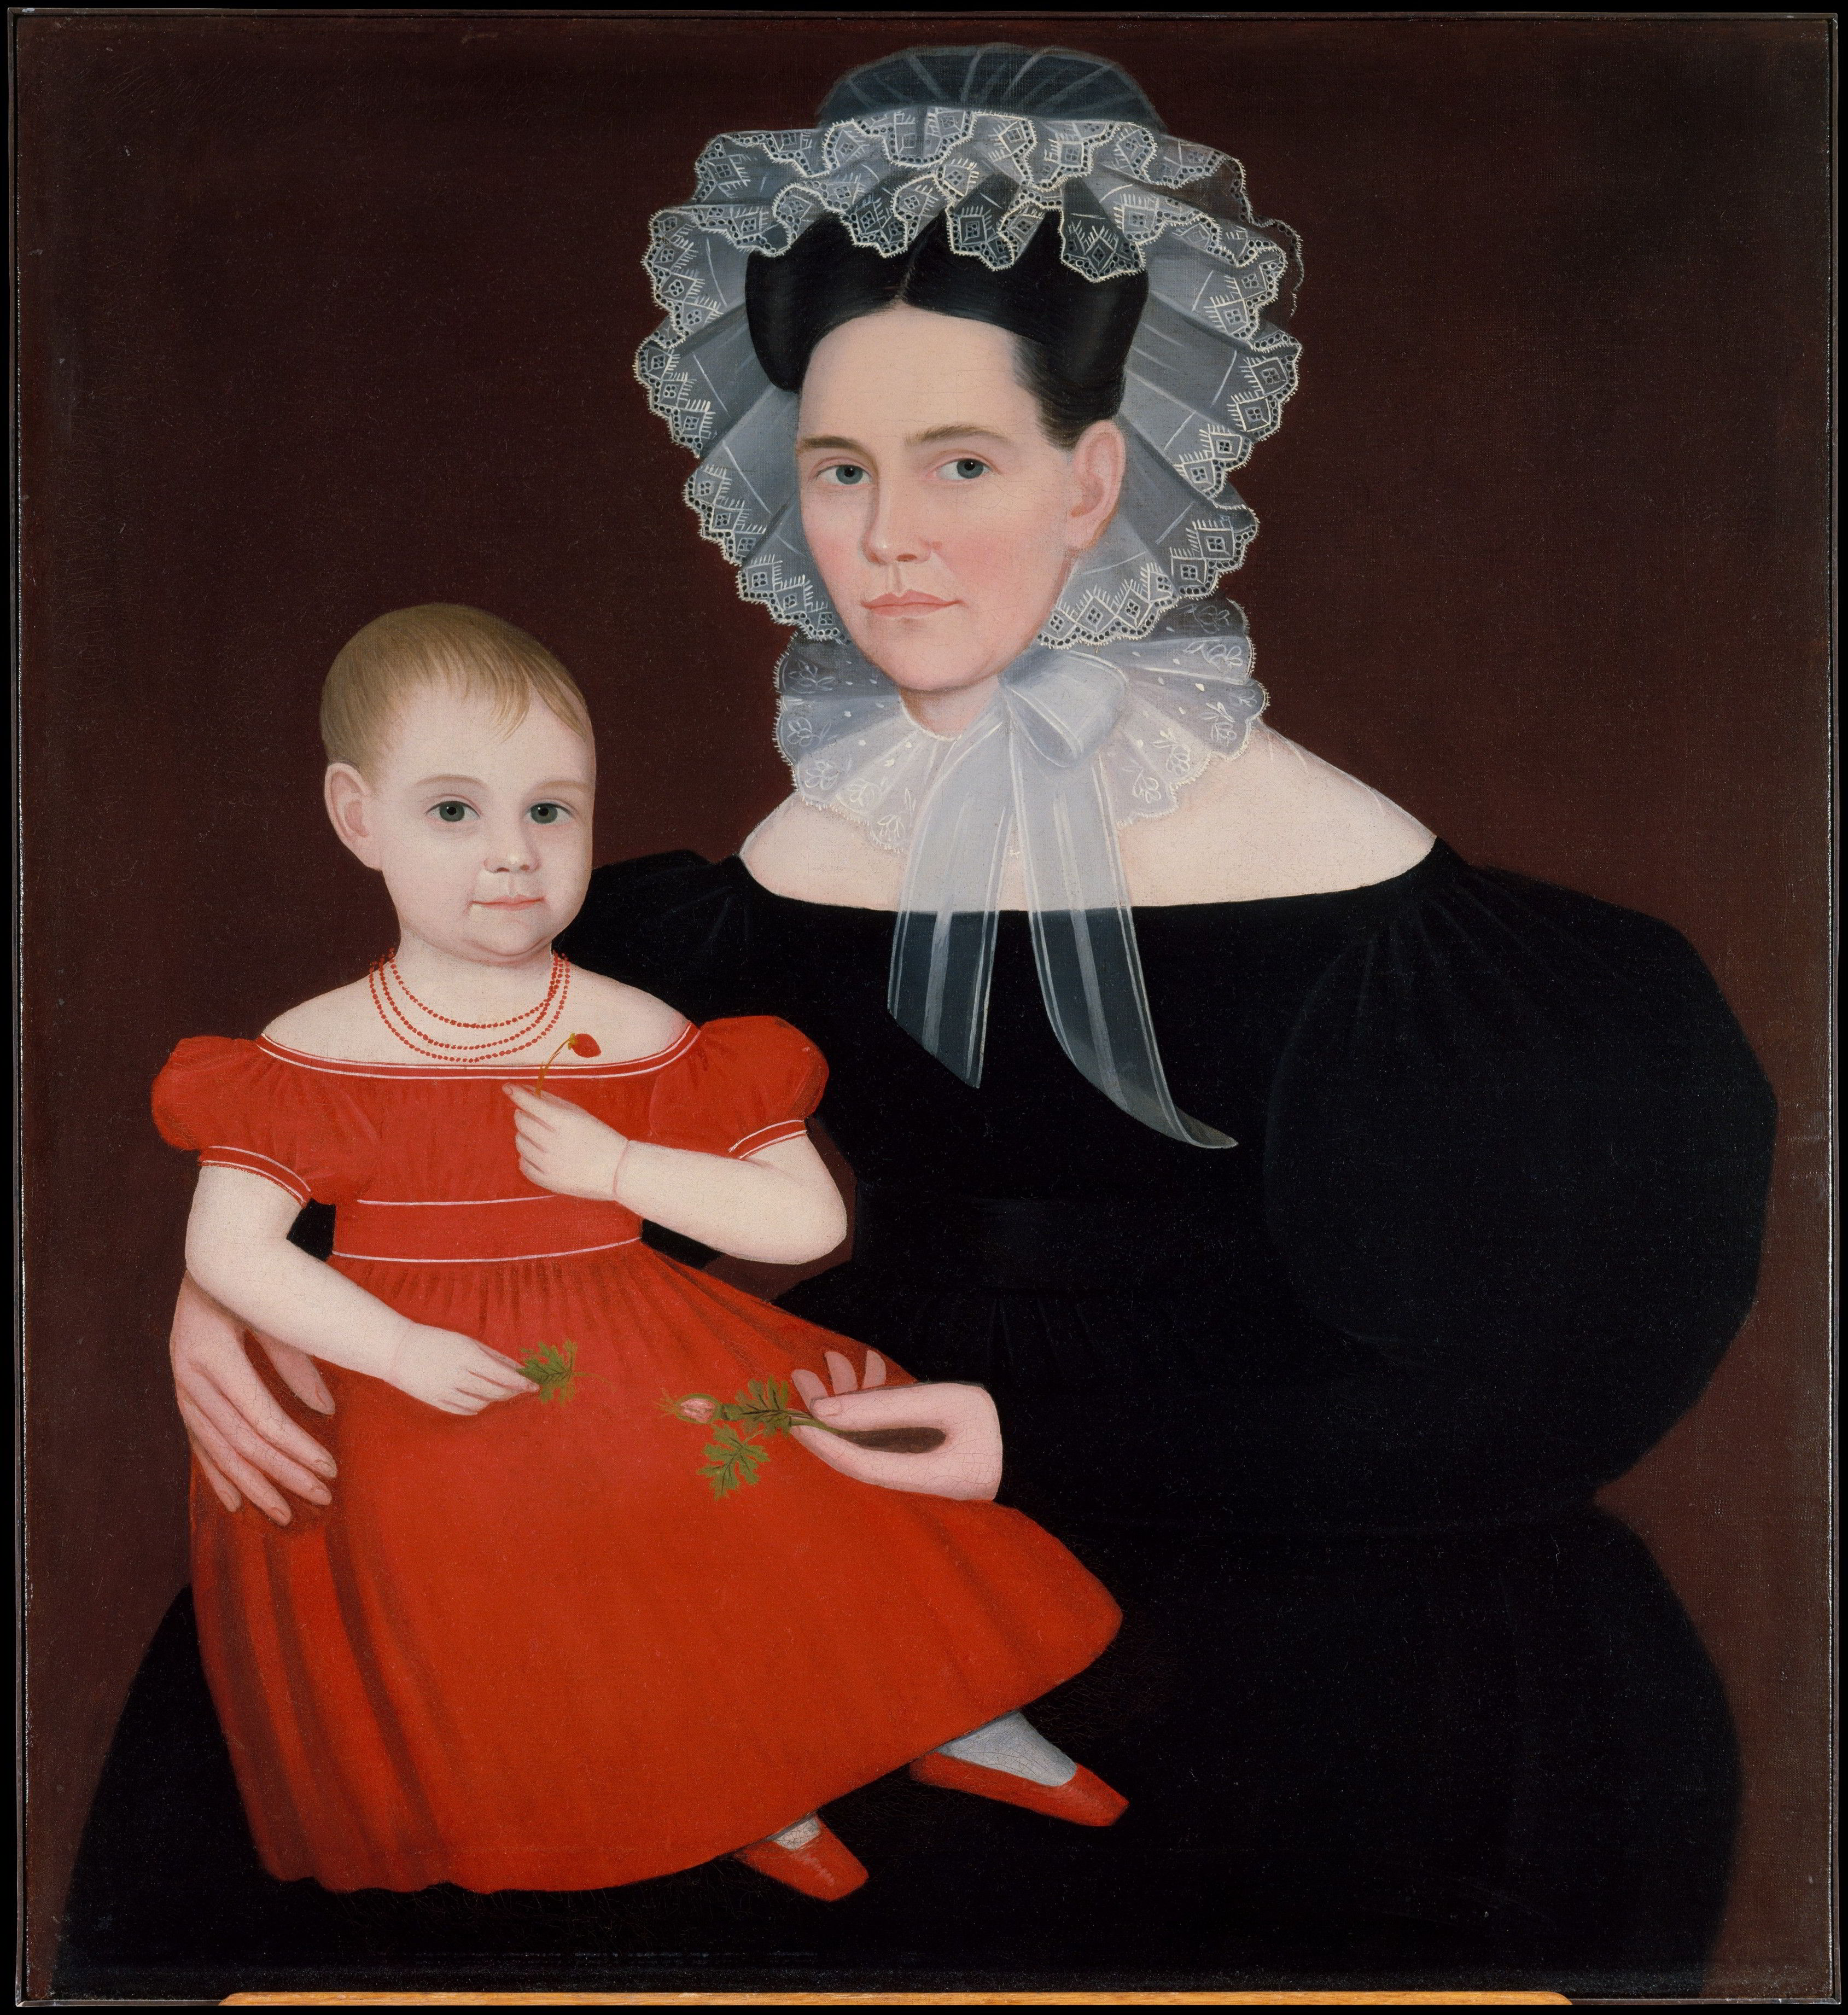 Mrs. Mayer and Daughter by Ammi Phillips